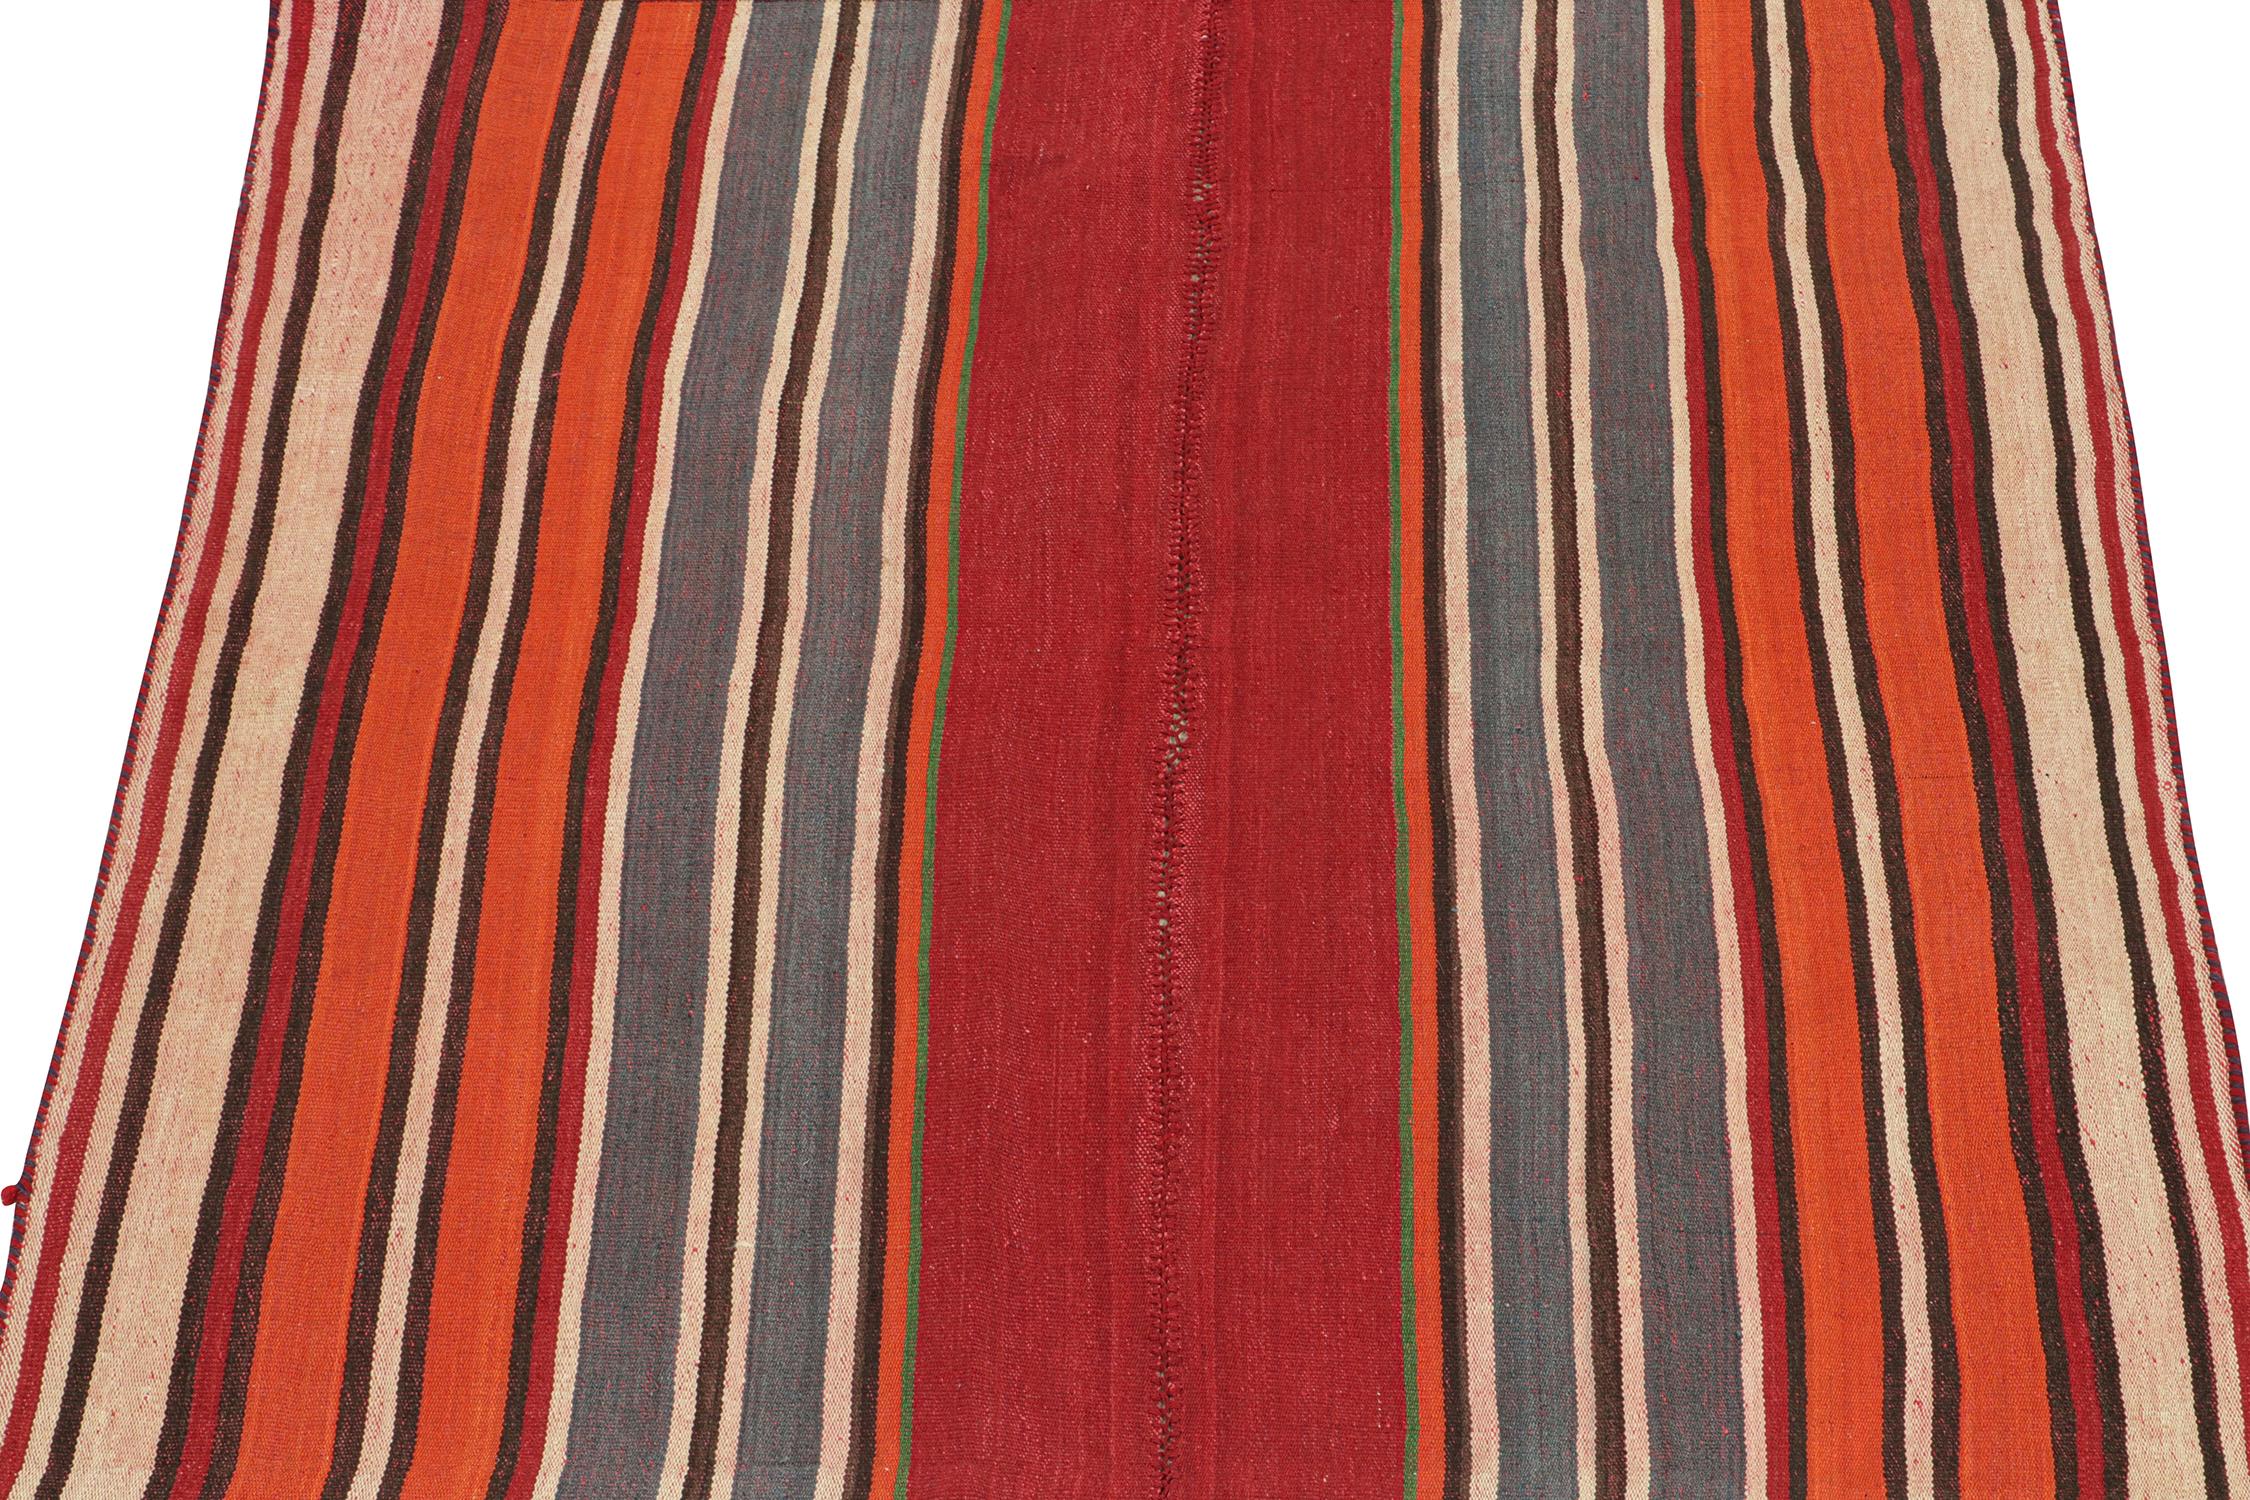 This vintage 5 x 6 Persian kilim is a Jajim flat weave of the Qashqai tribe—handwoven in wool circa 1950-1960.

Further on the design:

Connoisseurs may appreciate the Jajim technique, known to favor near-square sizes and stripes. Its technique